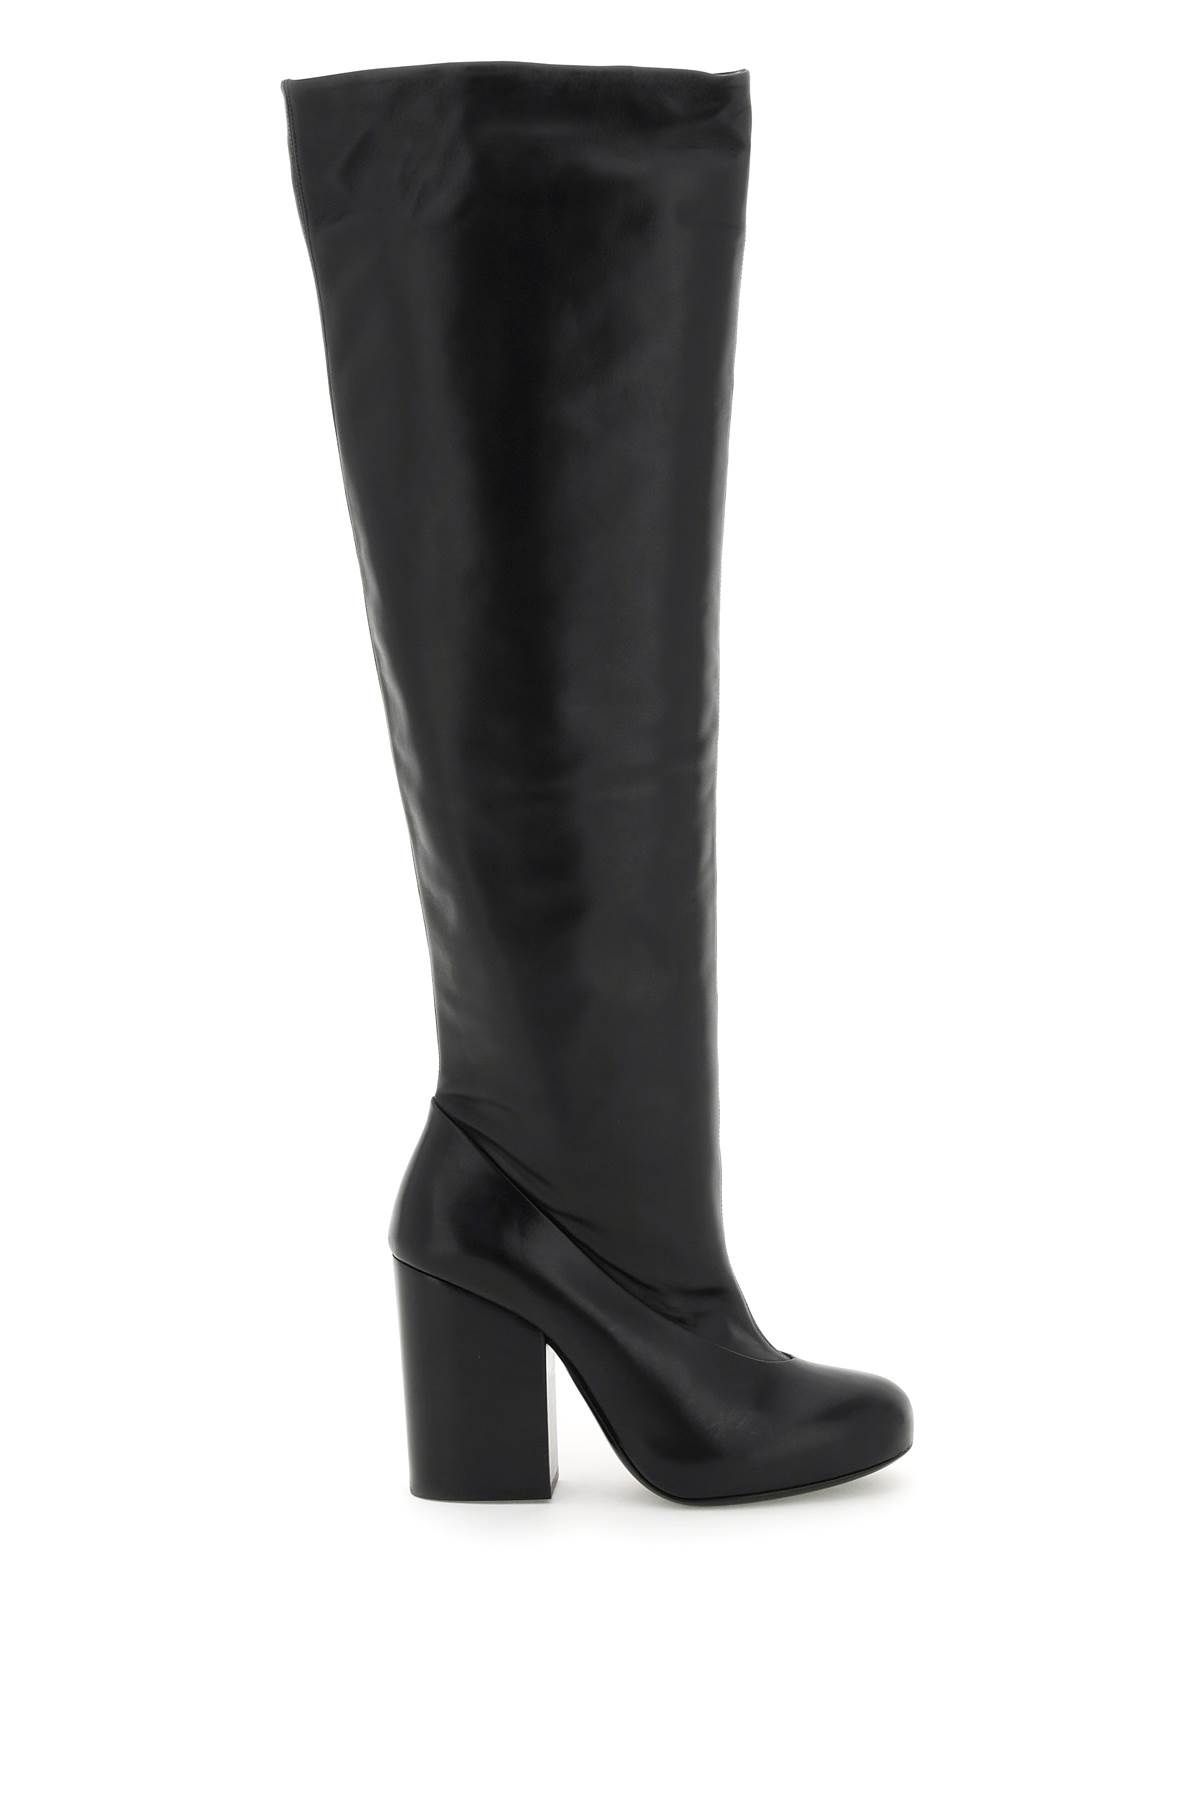 LEMAIRE LEATHER HIGH BOOTS